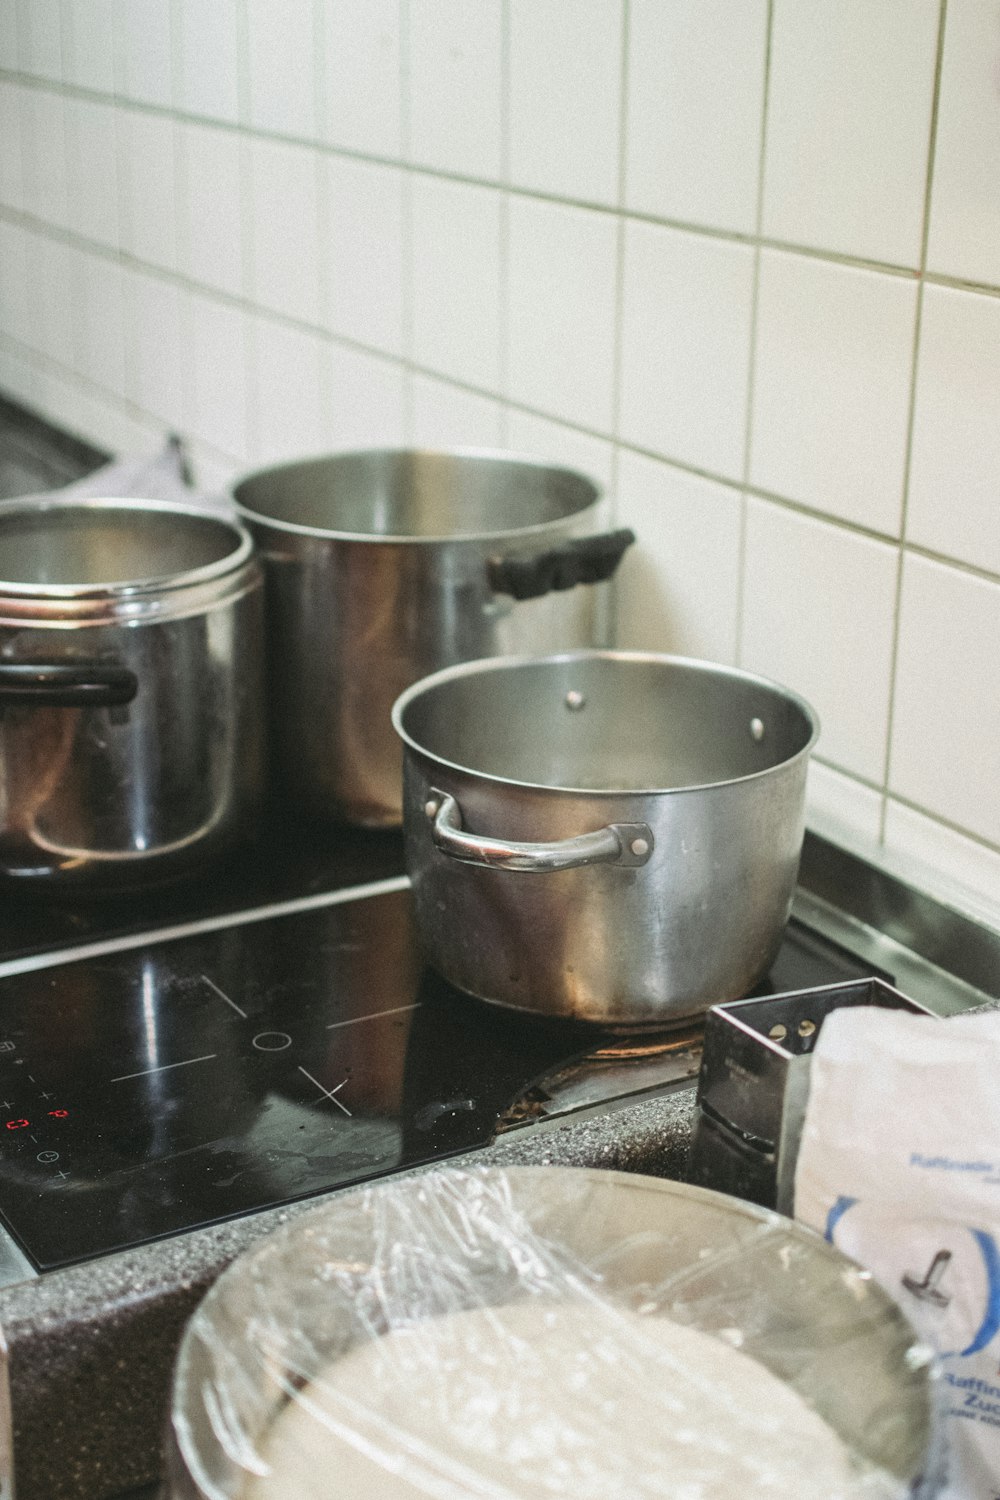 stainless steel cooking pots on stove